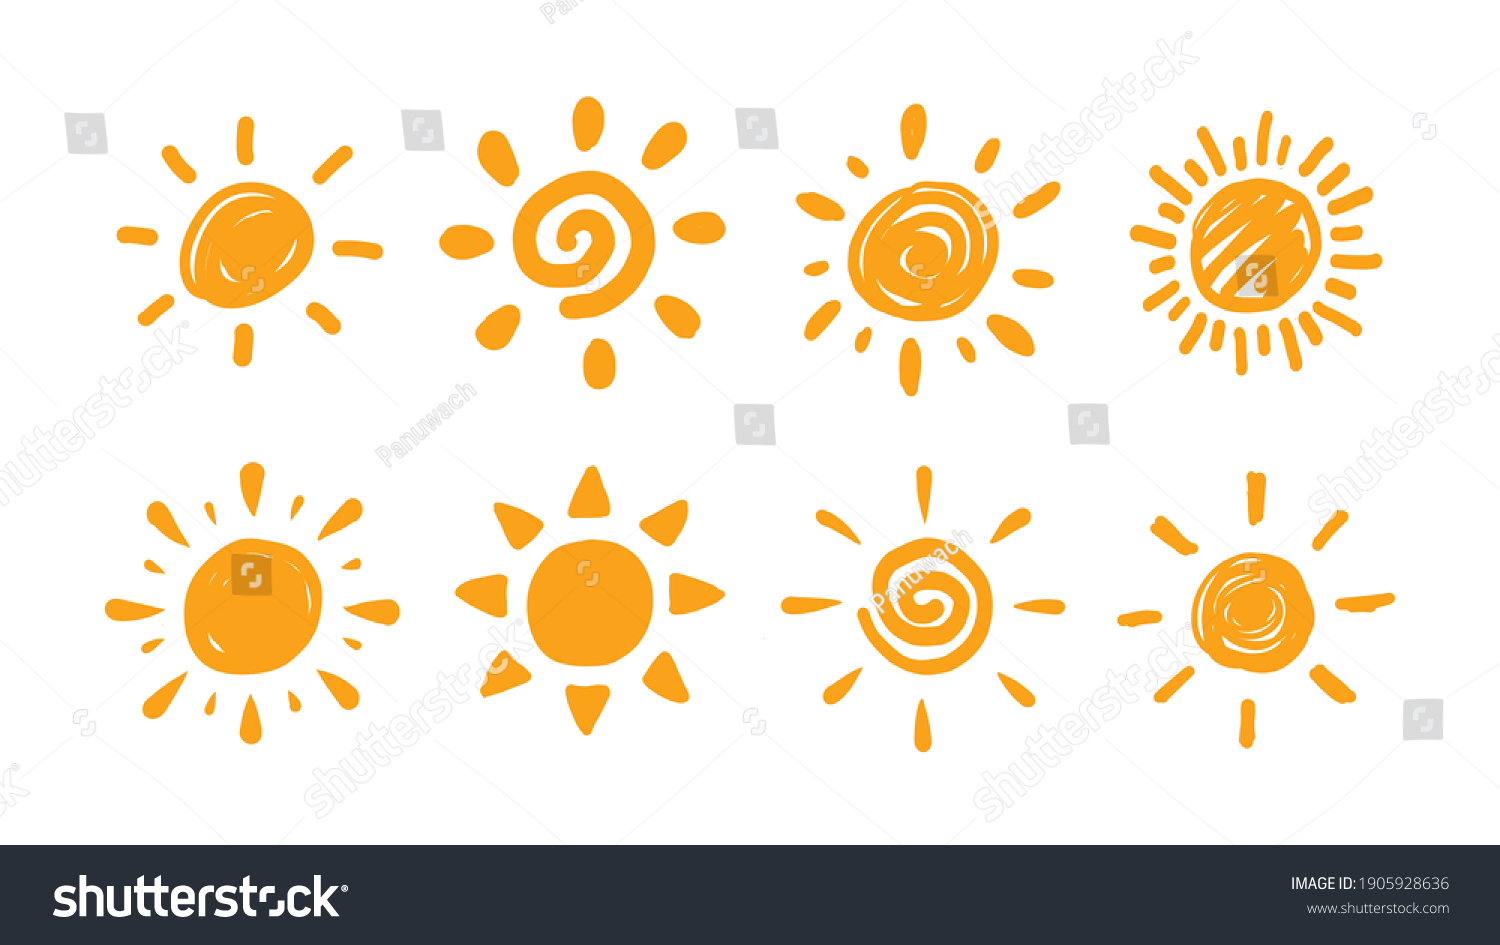 Cute doodle sun collection. Hand drawn style illustration set.  #1905928636